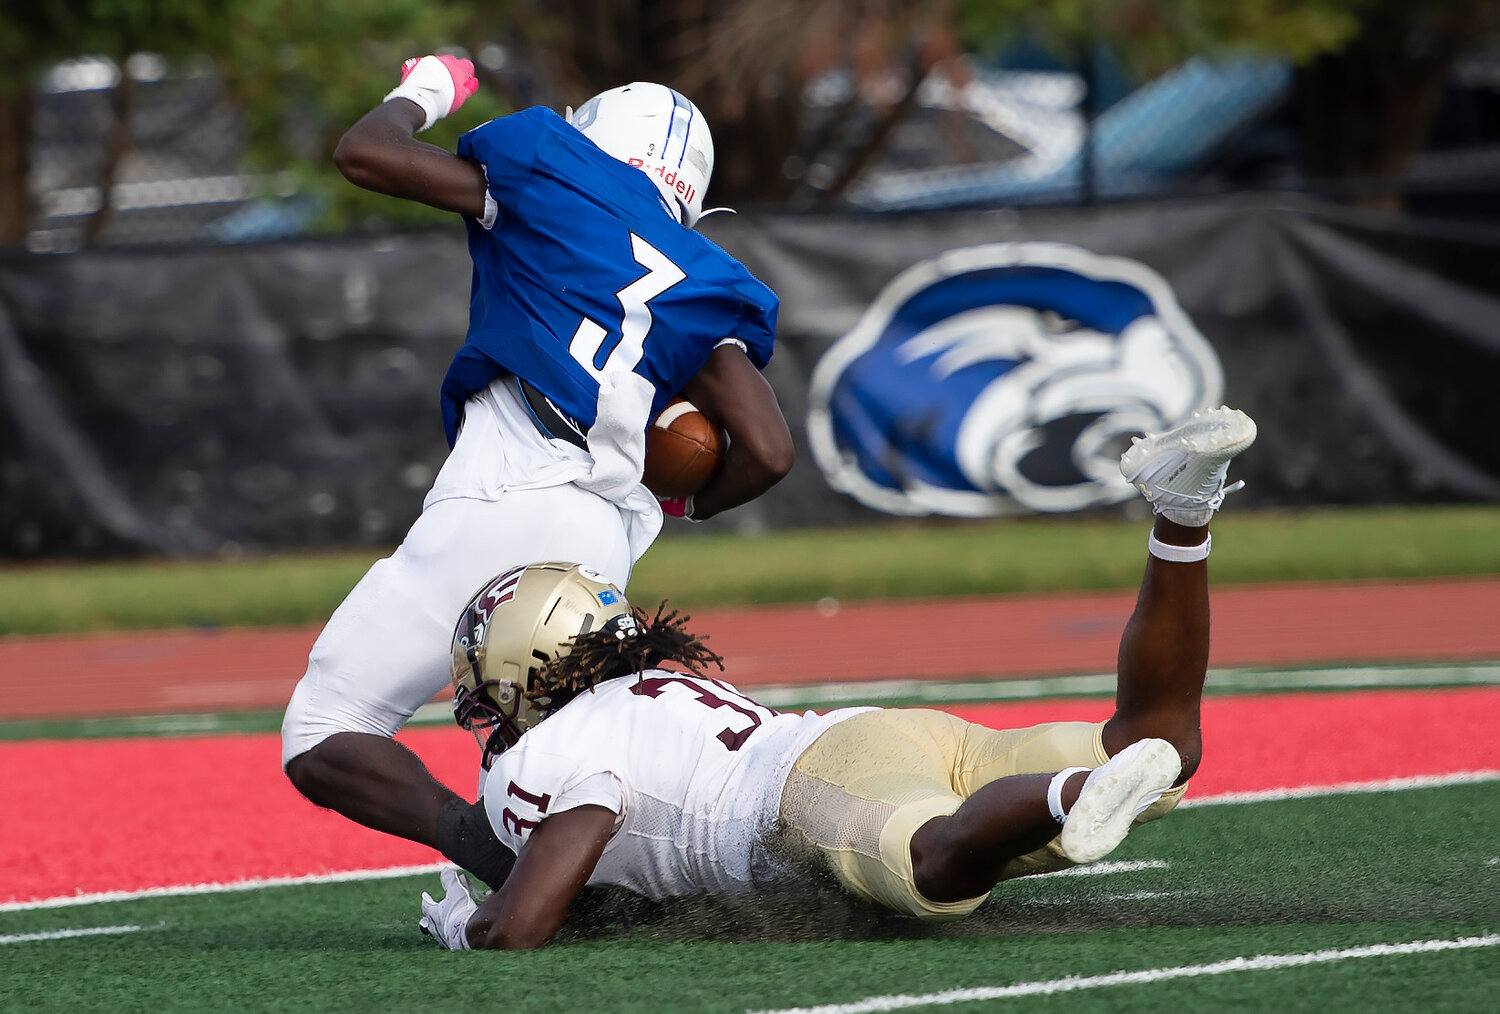 Erskine College defensive back Jakai Robinson (31) brings down Shorter University wide receiver Brando McGill on the 1-yard-line after a long reception in the third quarter Saturday, Sept. 9, 2023, in Rome, Ga. Shorter won 28-7. (Index/Henry Durand)